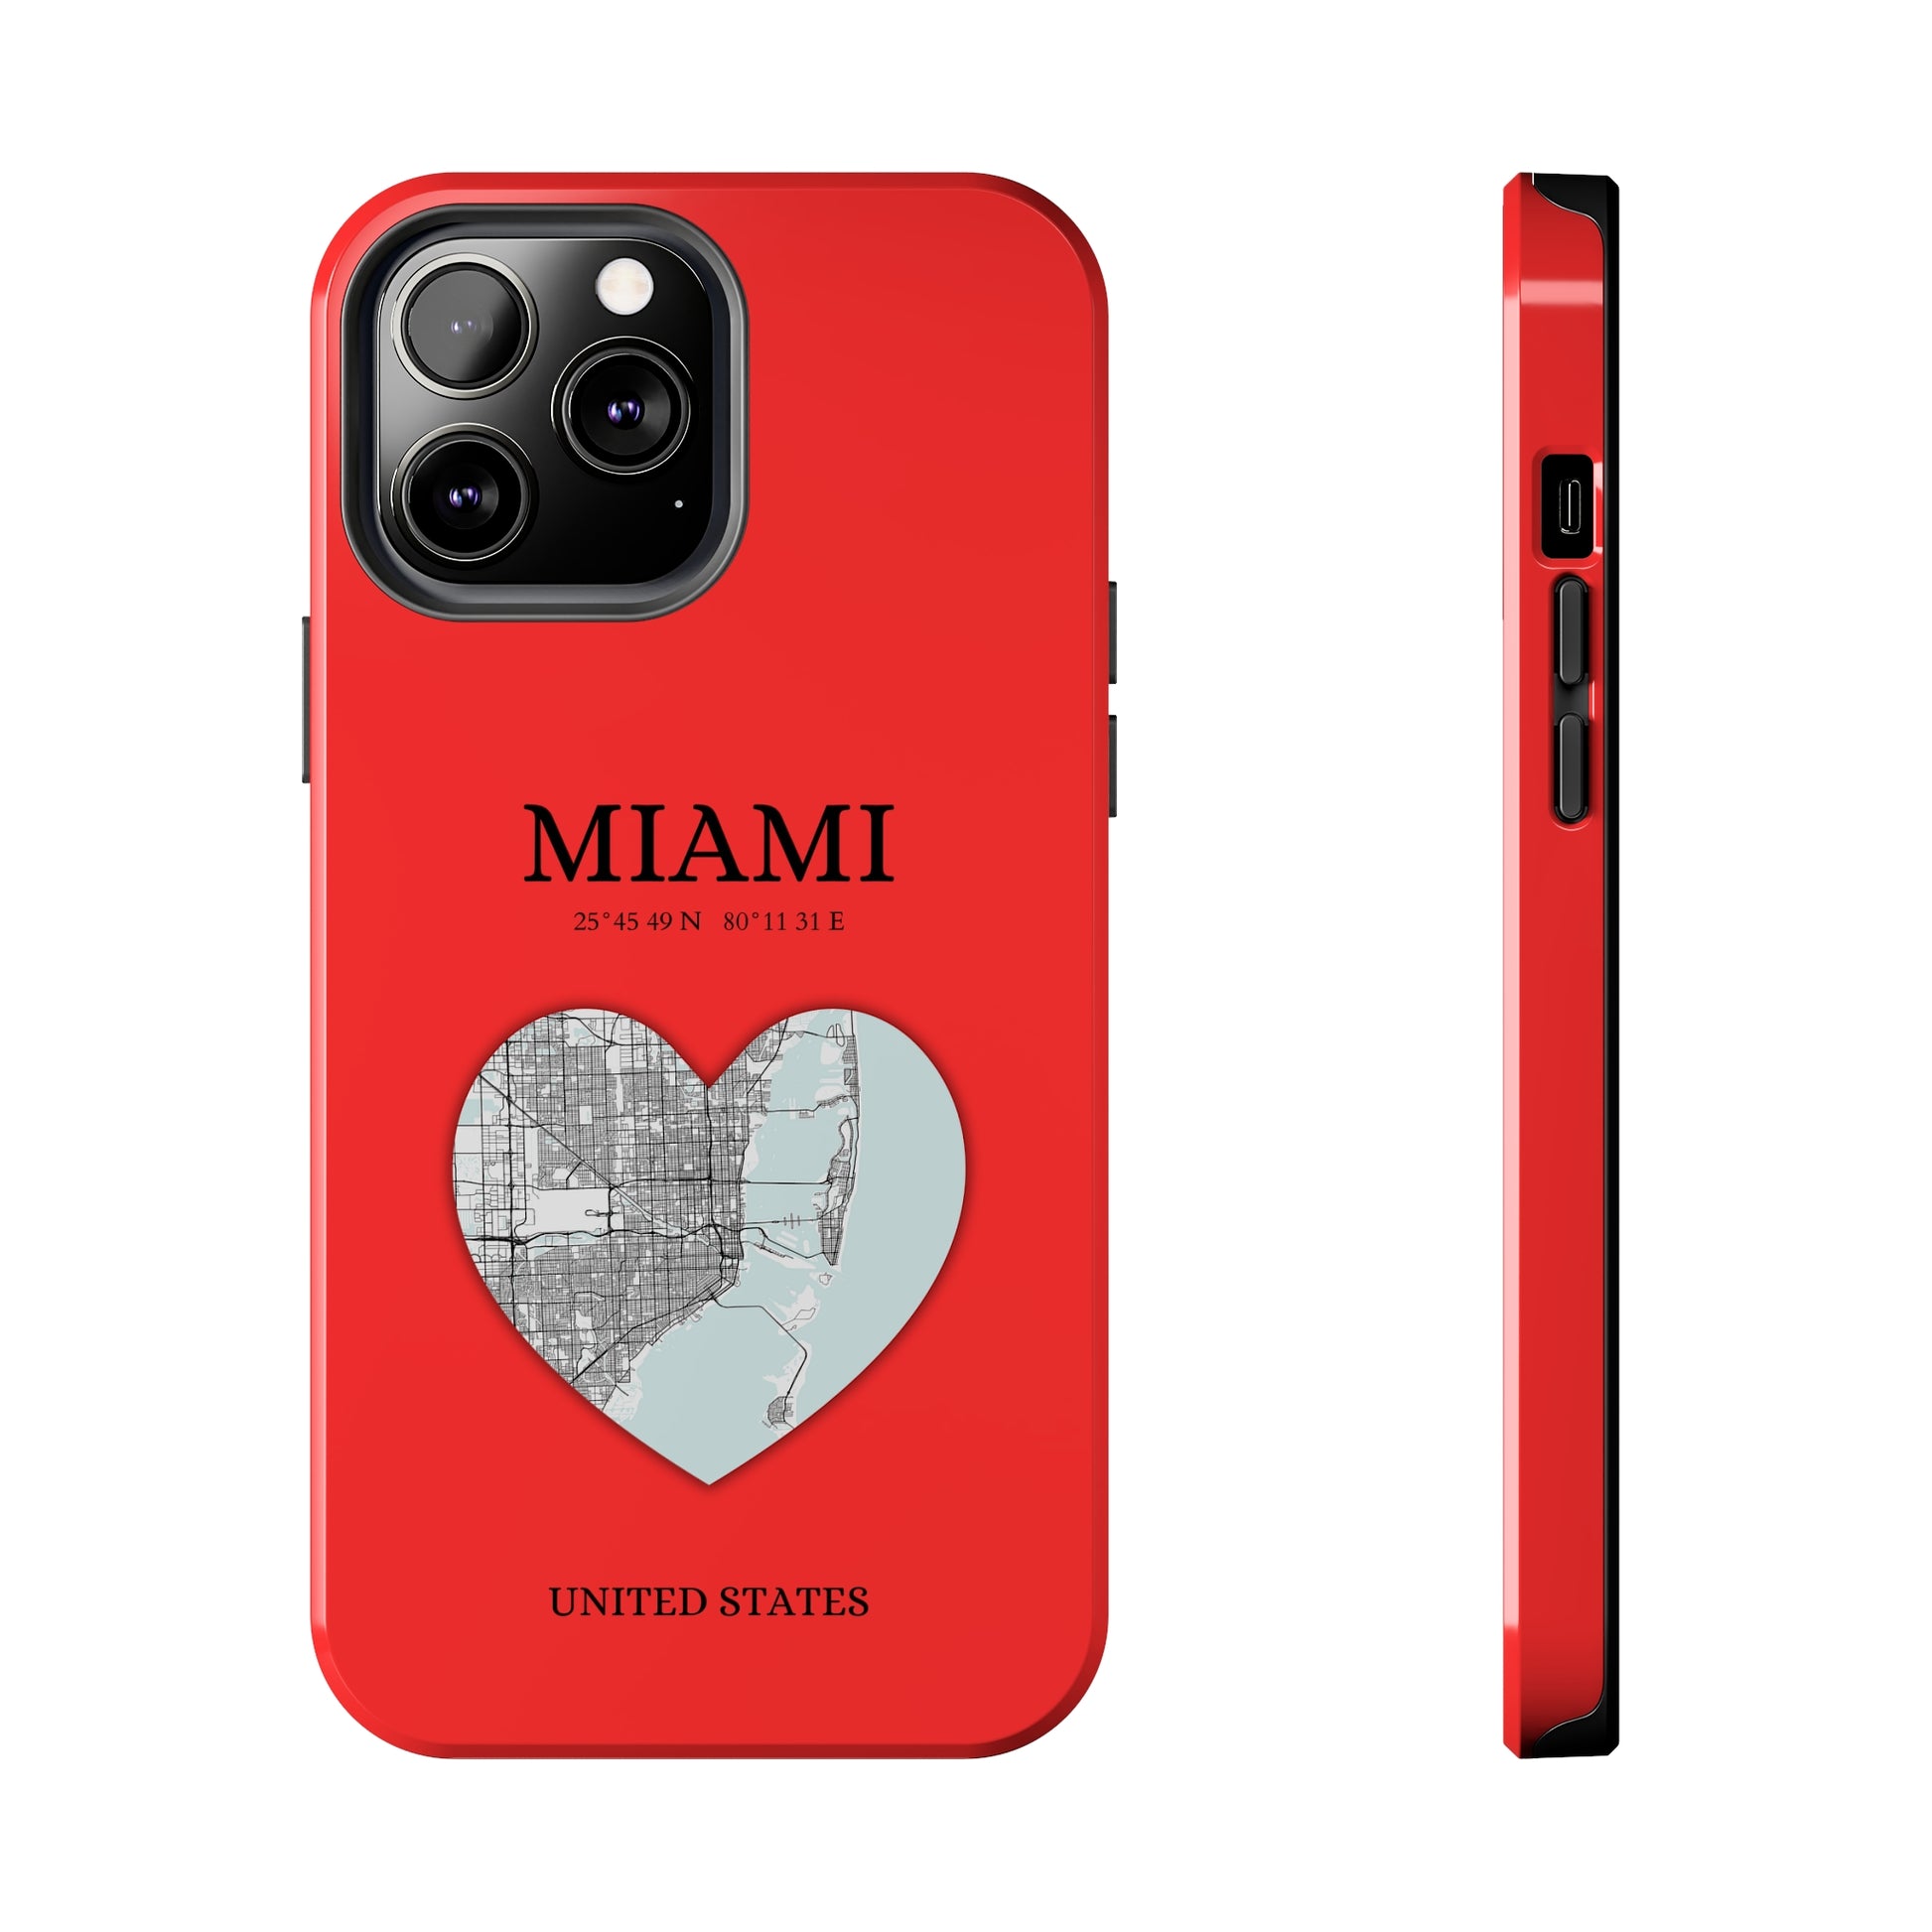 Miami Heartbeat - Red (iPhone Case 11-15)Capture the essence of MIAMI with RimaGallery's Heartbeat RED iPhone case, blending durable protection and unique design. Perfect for iPhone 11-15 models. Free shippRimaGallery